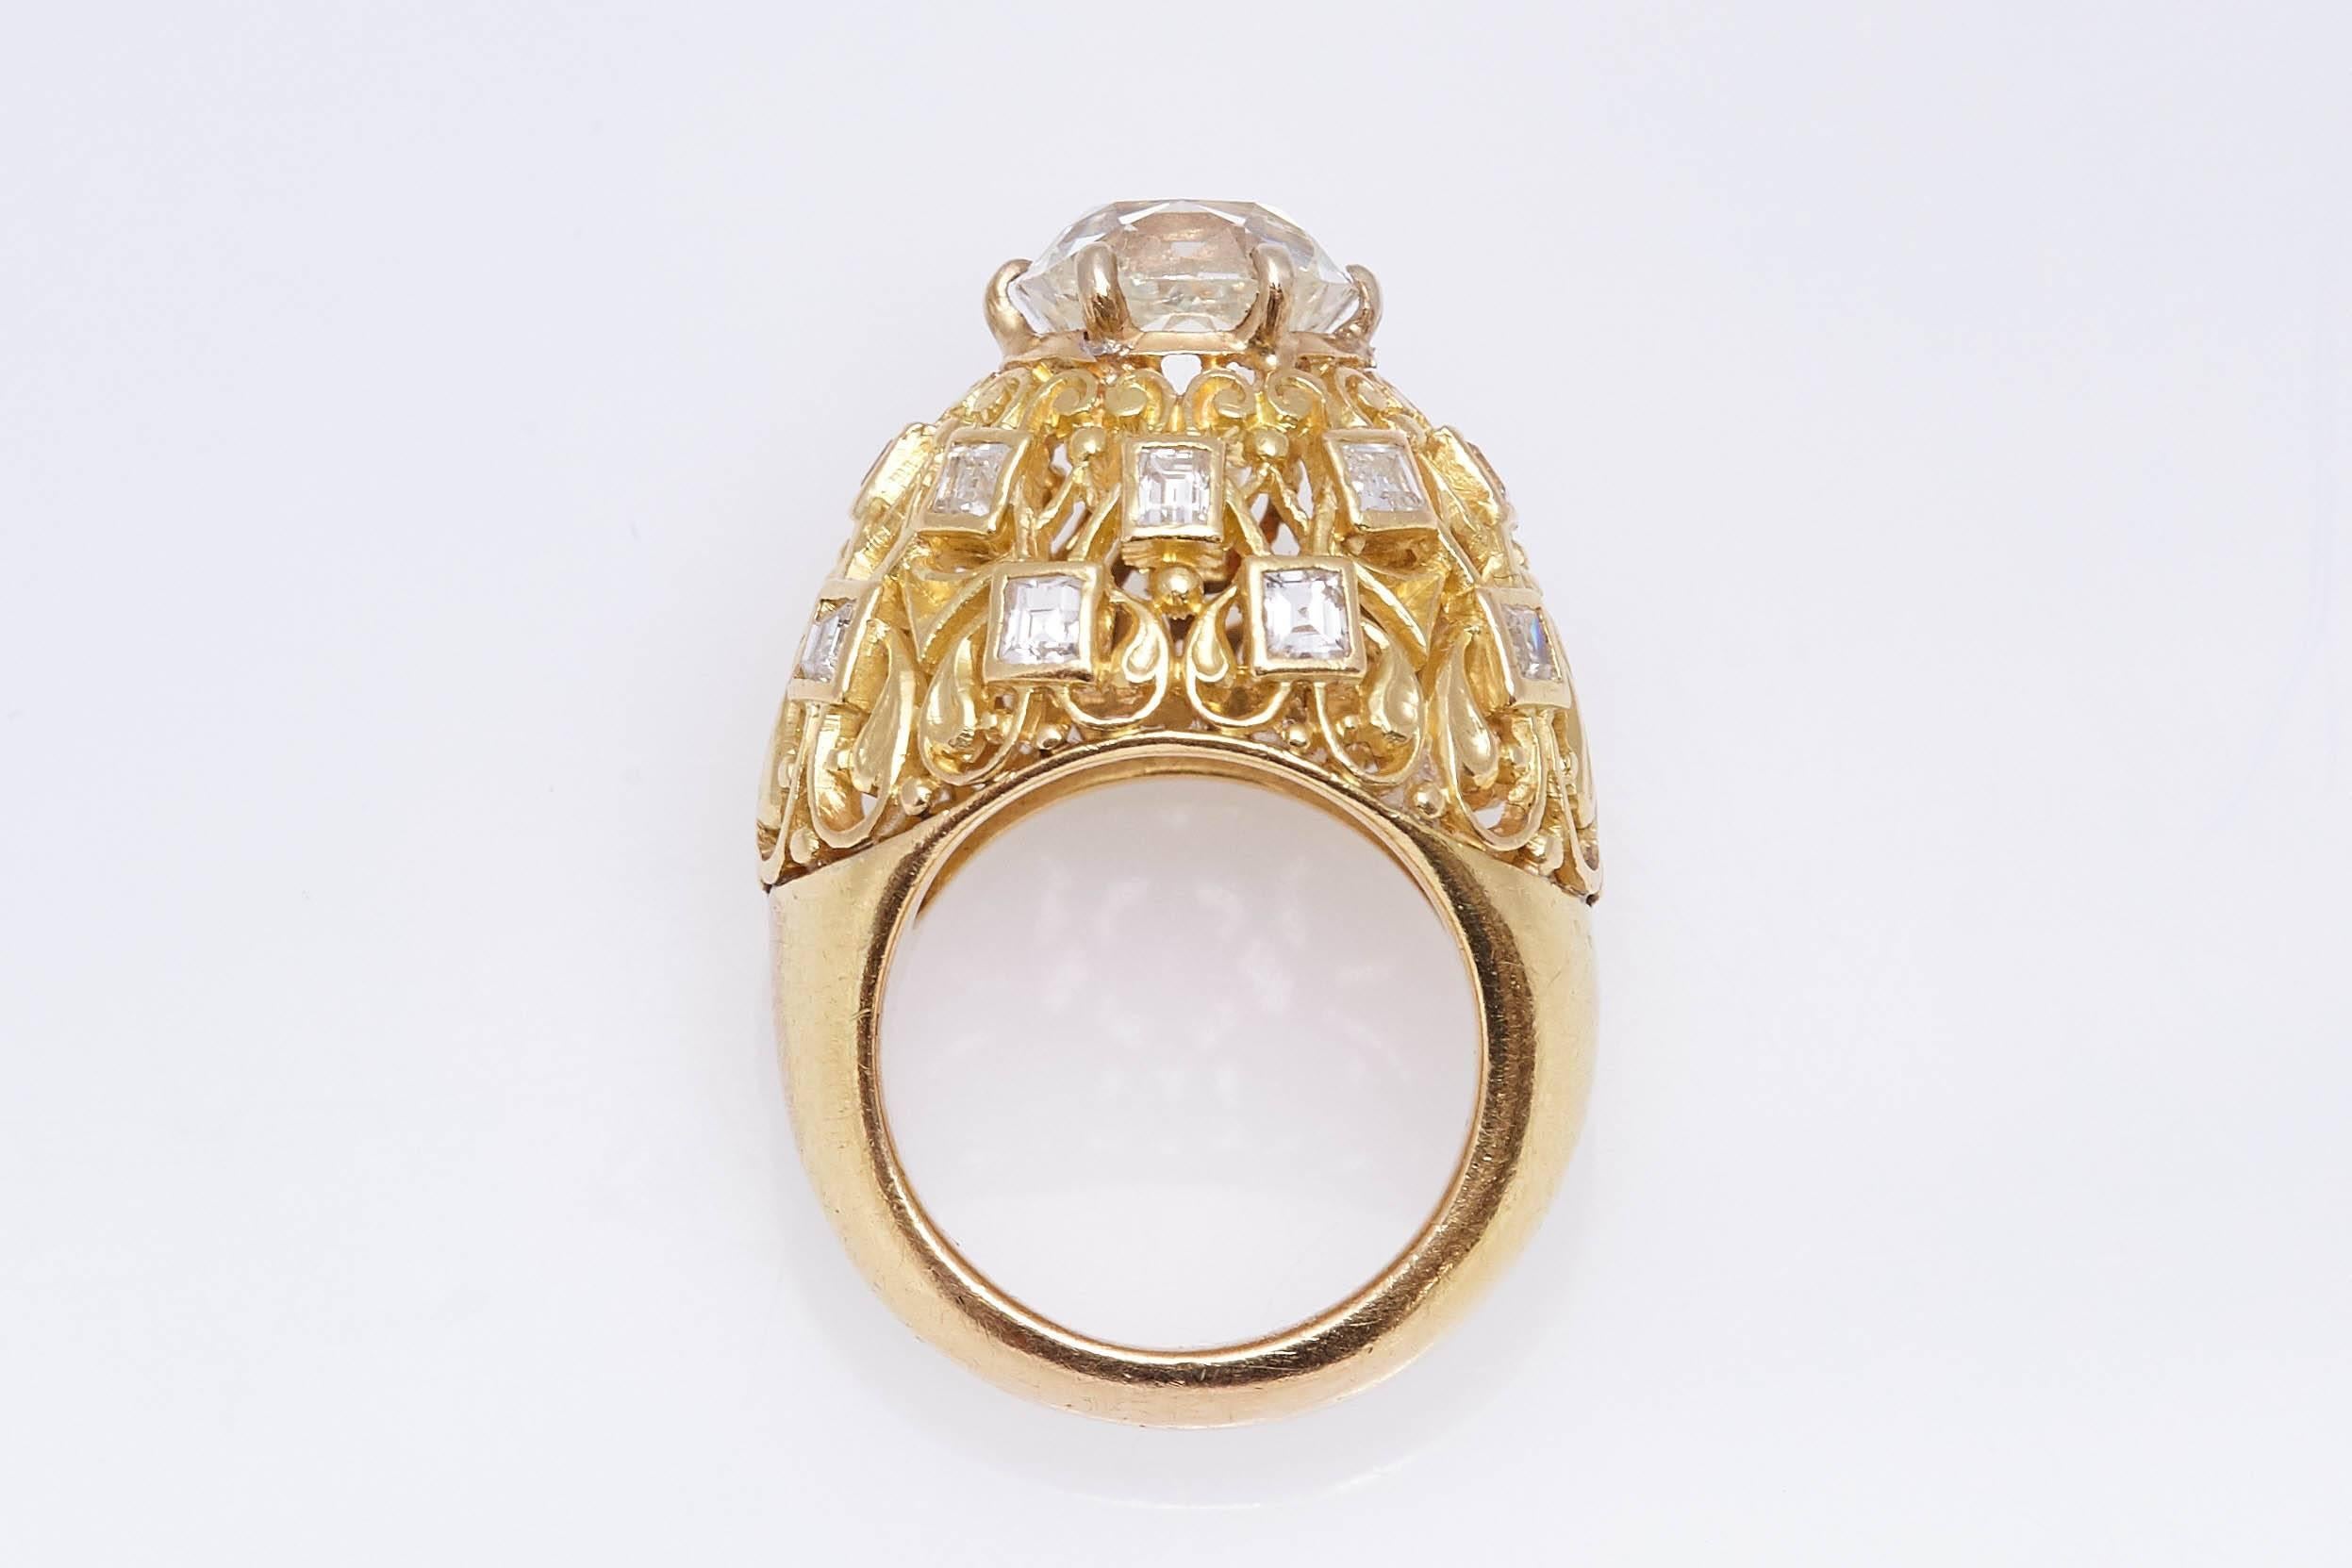 Cartier Retro Diamond Gold Ring In Excellent Condition For Sale In New York, NY